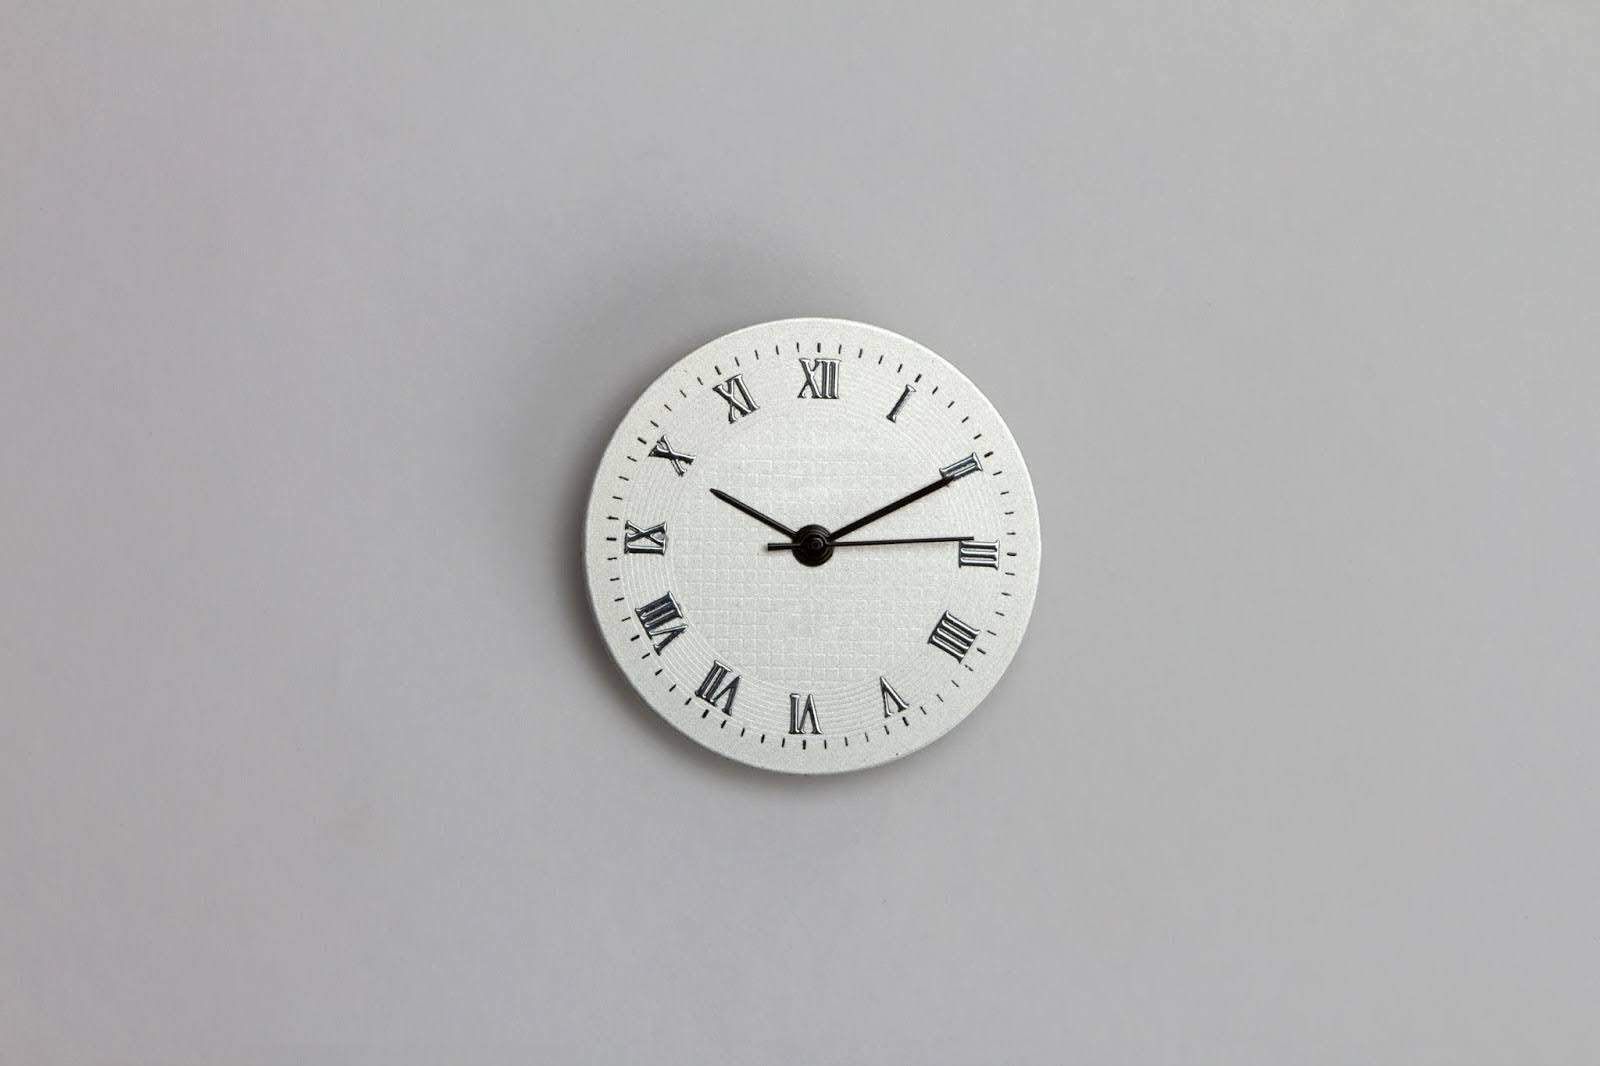 White wall clock with roman numerals displays 10:10, on a gray wall